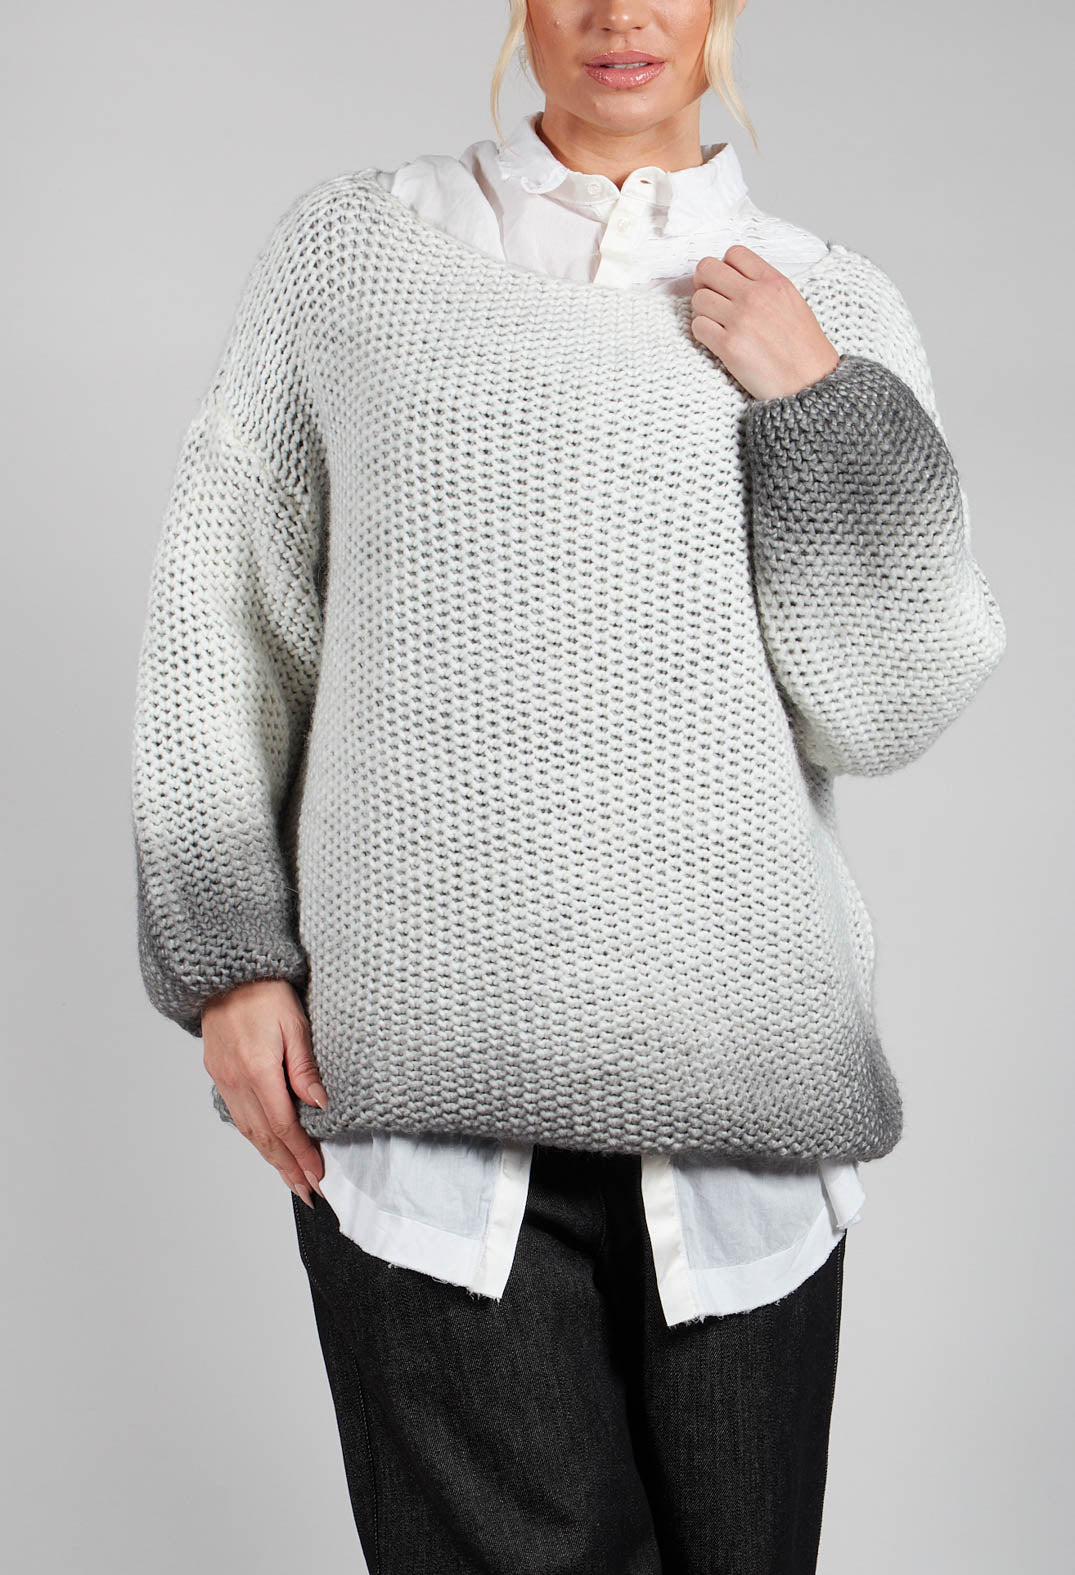 Relaxed Fit Knitted Jumper in Drgade Panna